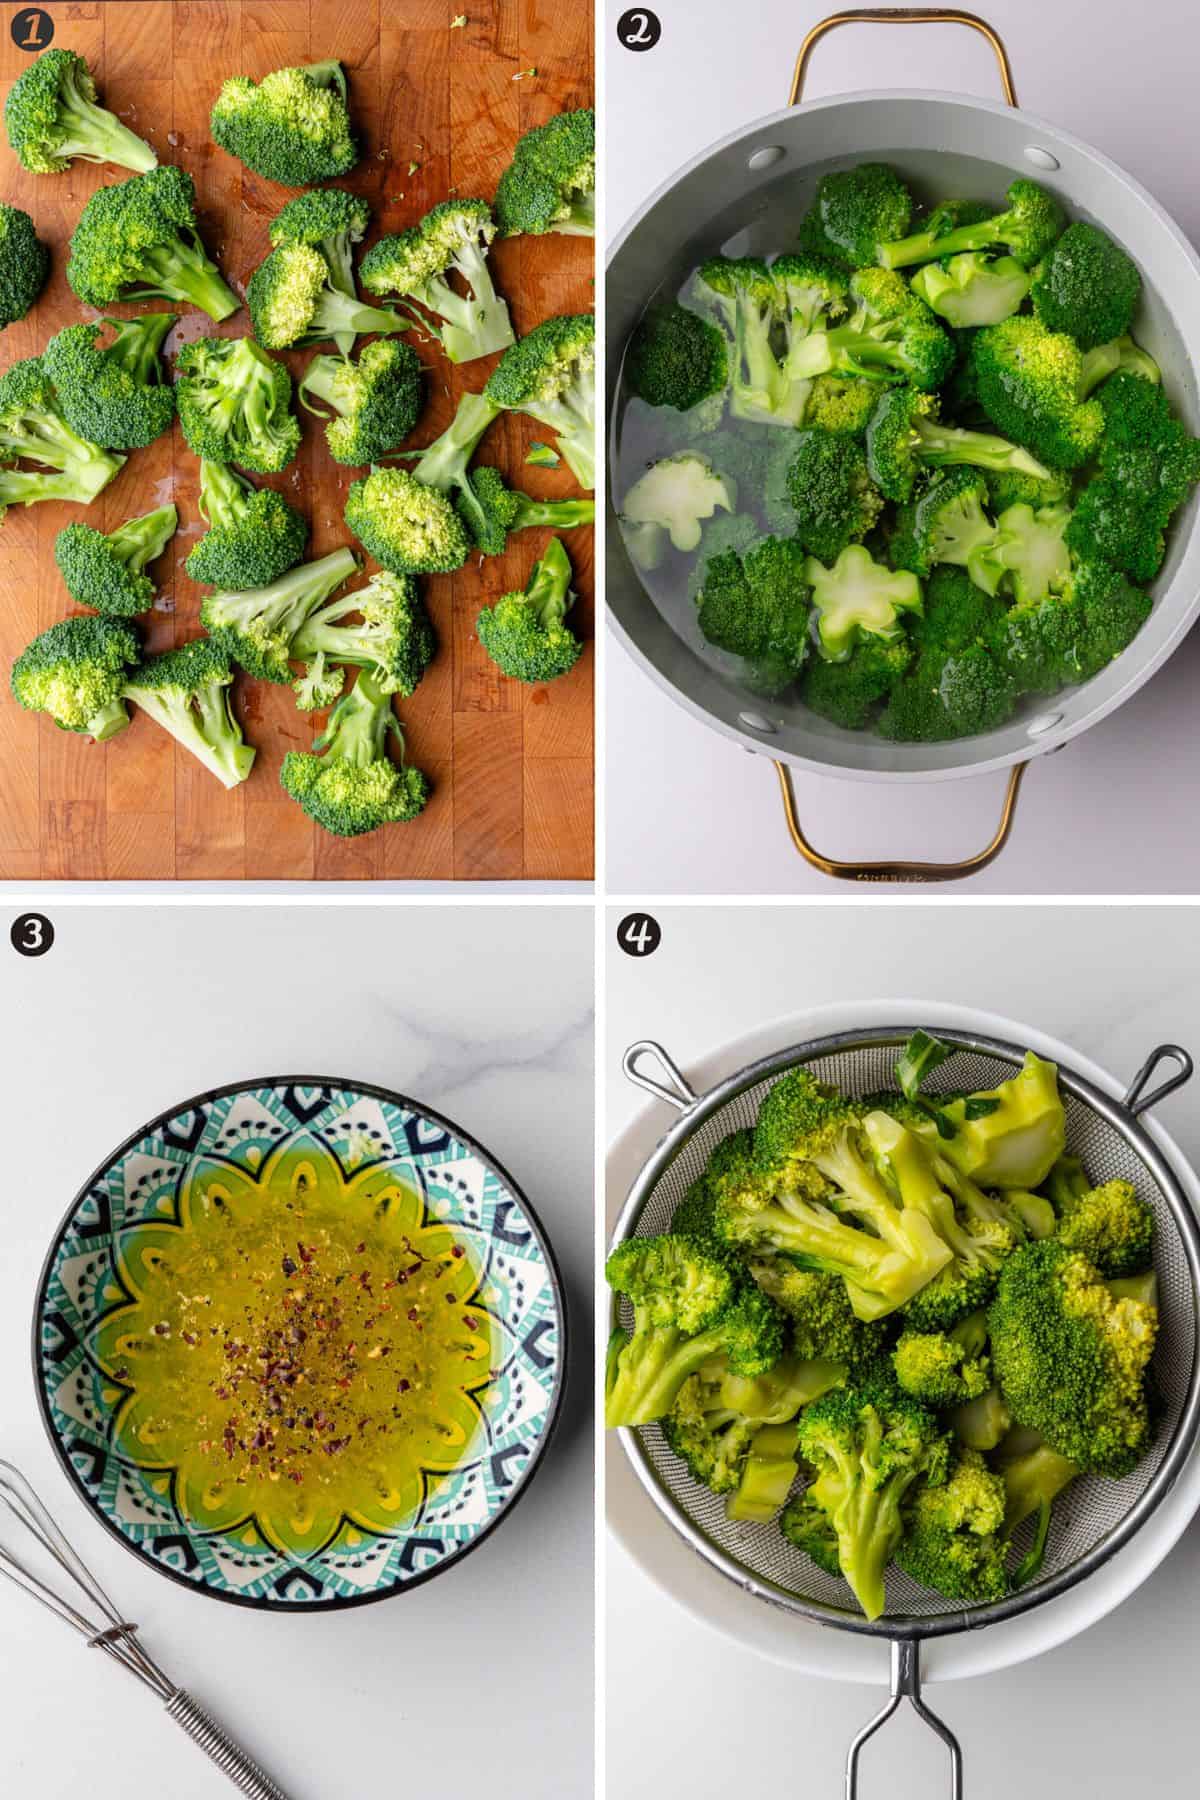 Steps on how to prepare broccoli for smashed broccoli recipe